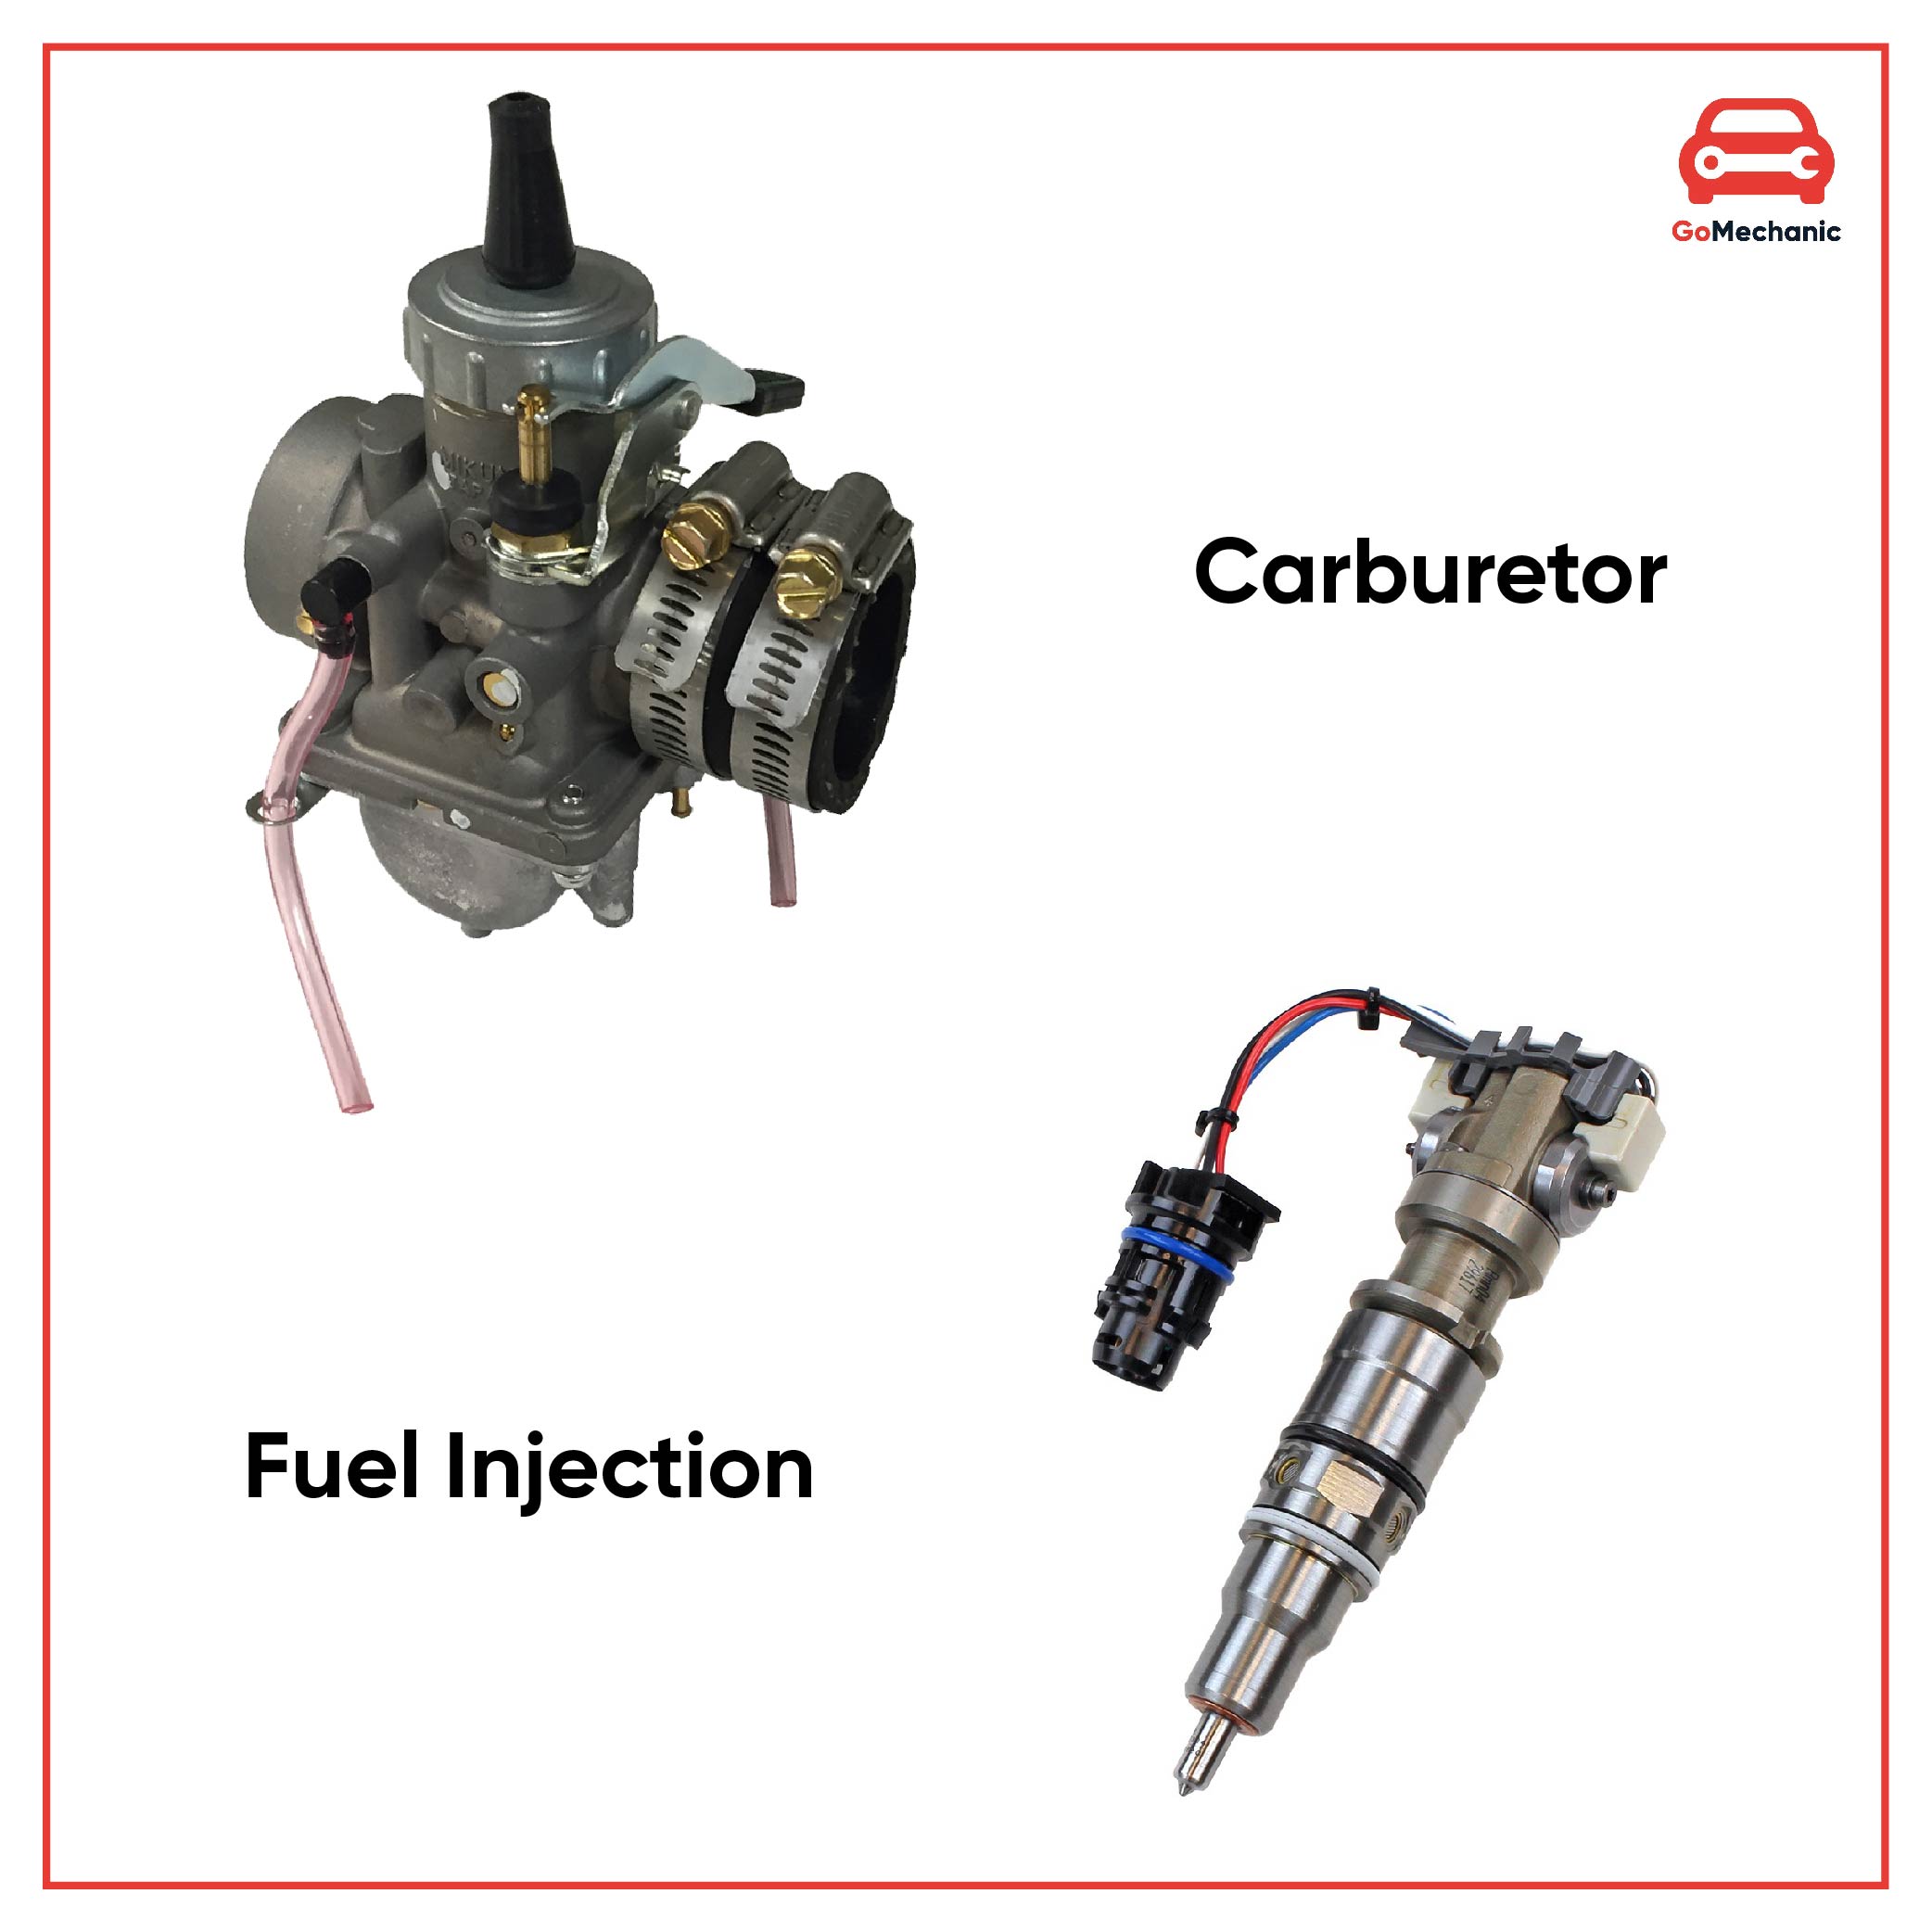 What are the difference between diesel injector and gasoline